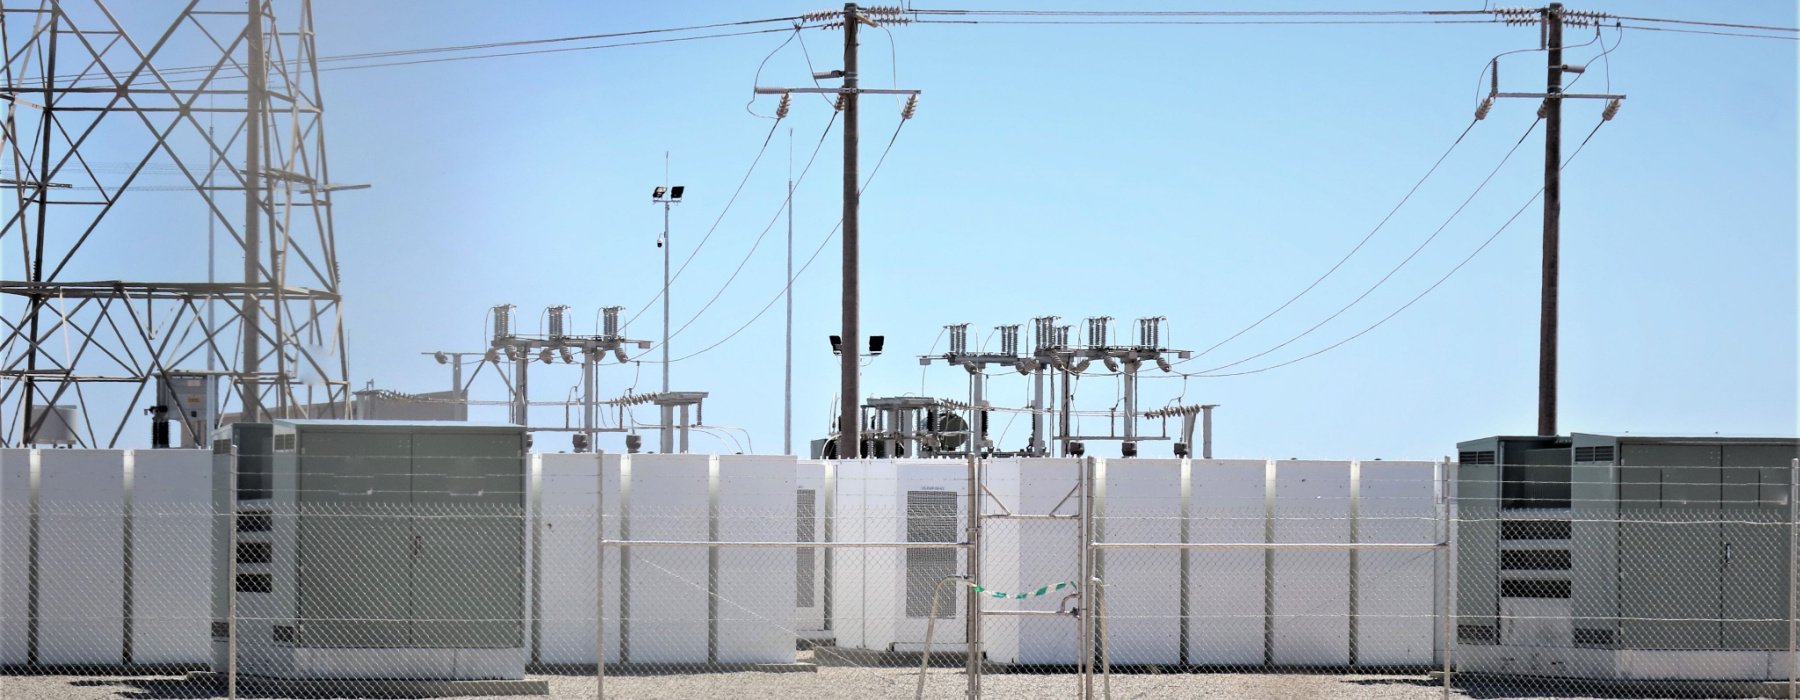 Energy Storage Tax Credit: Before and After the Inflation Reduction Act